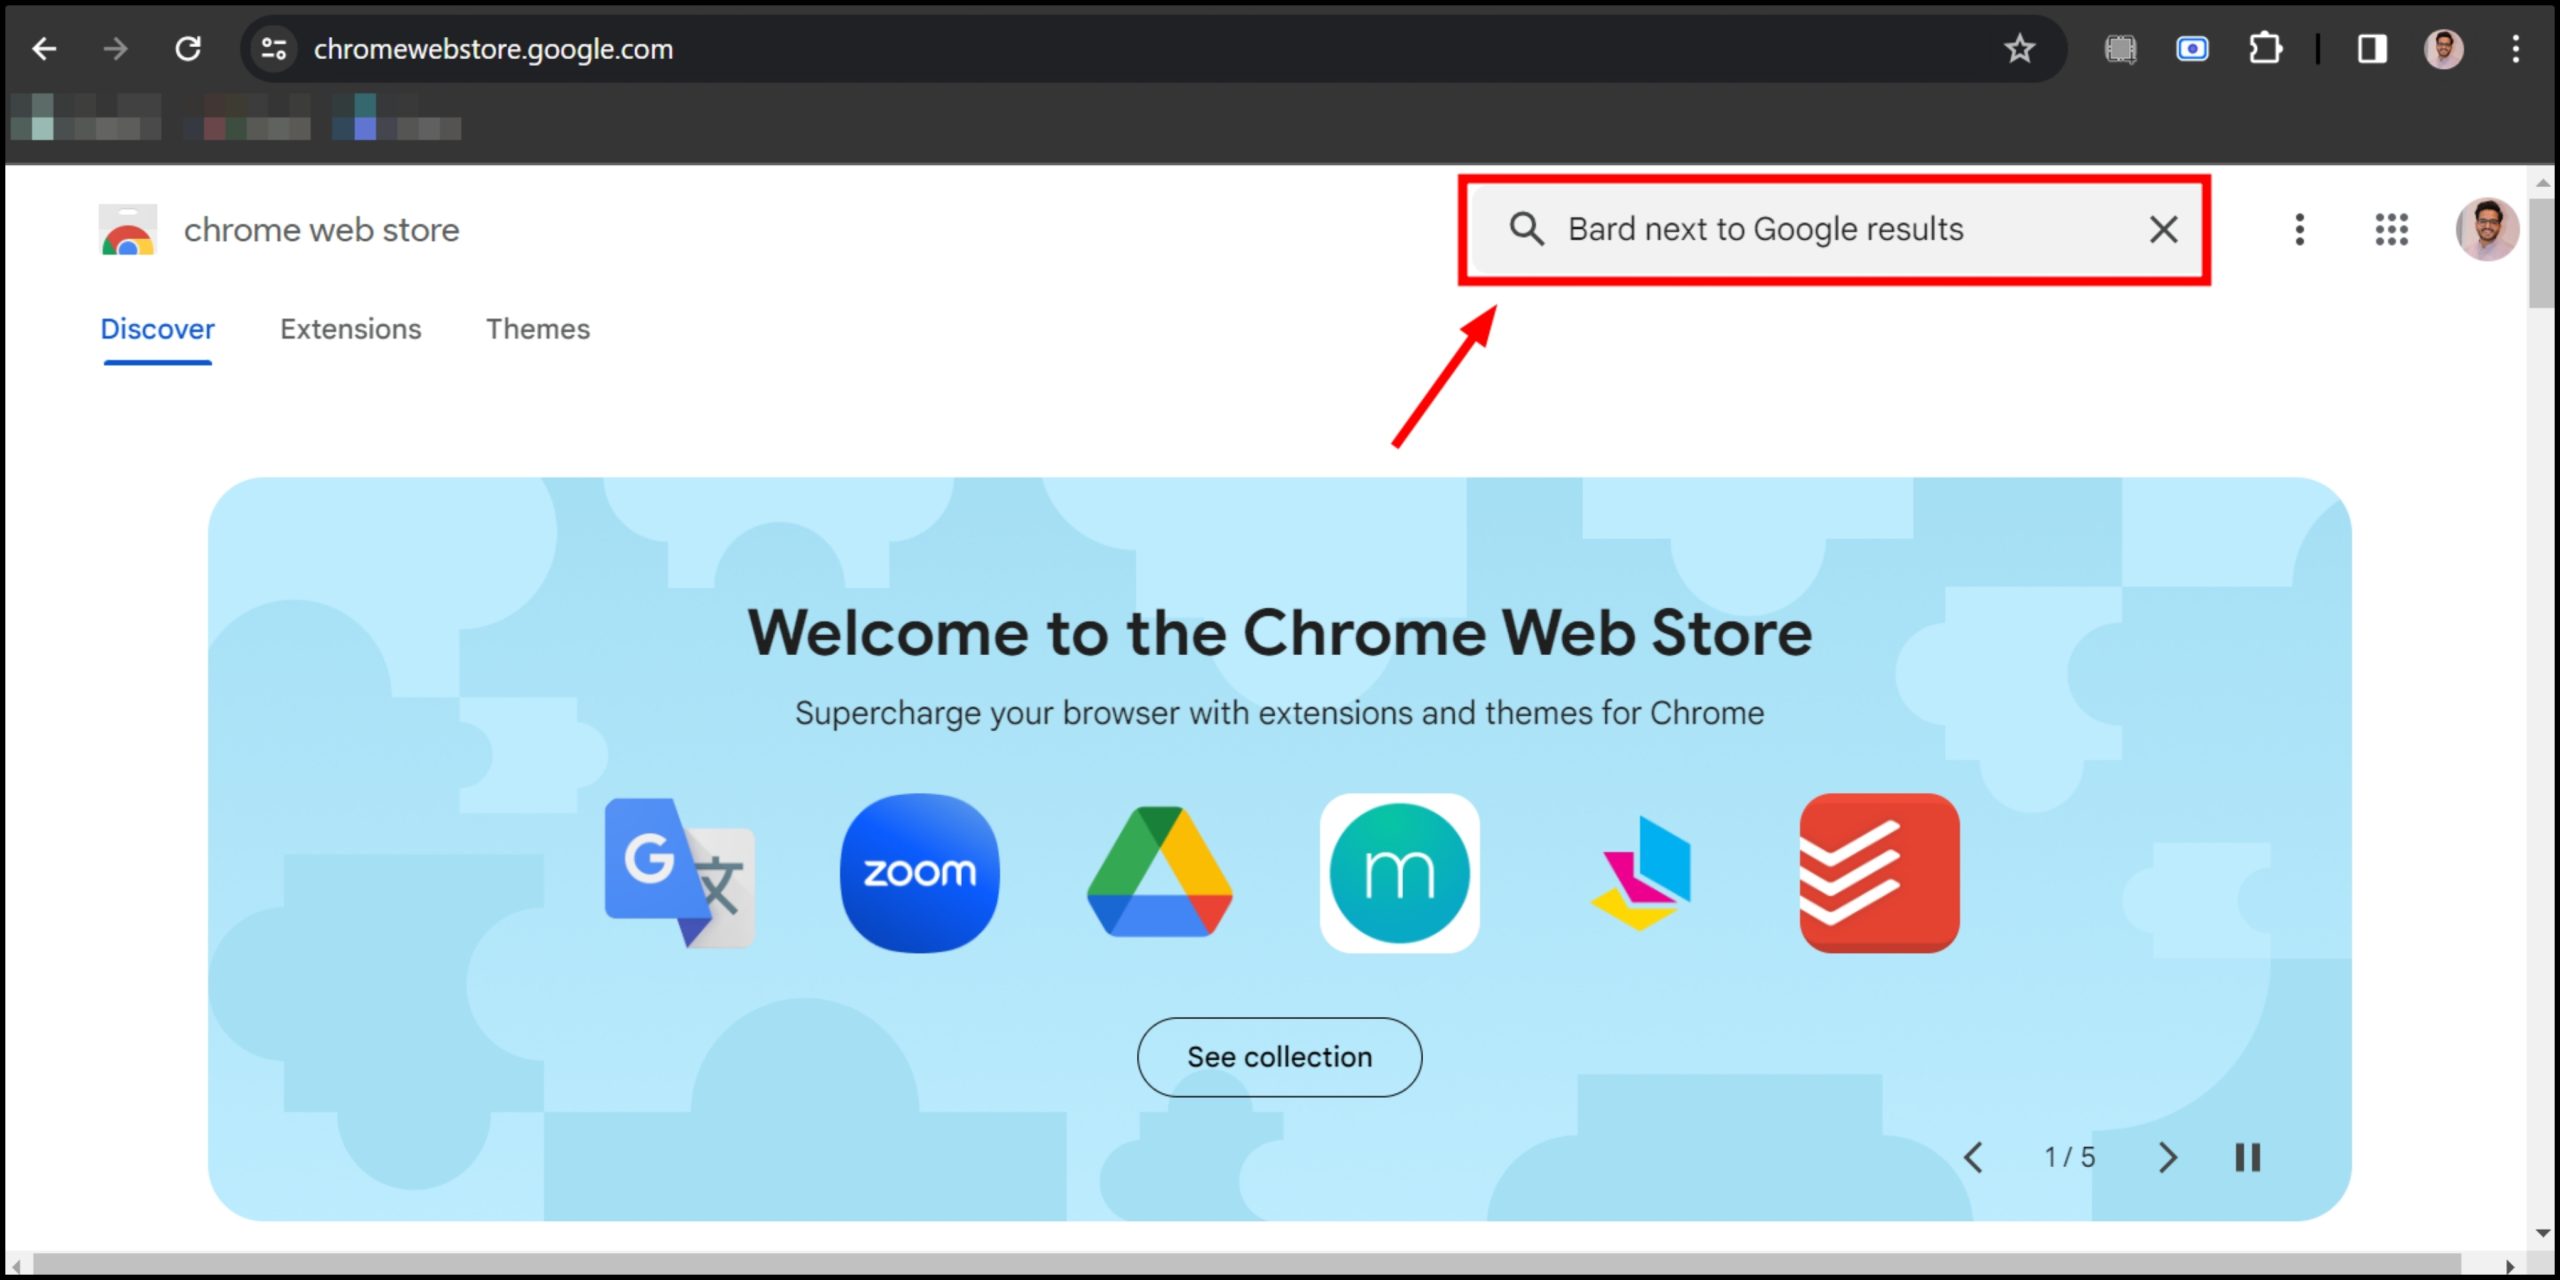 Go to the Chrome Web Store and look up Bard next to Google results Chrome extension